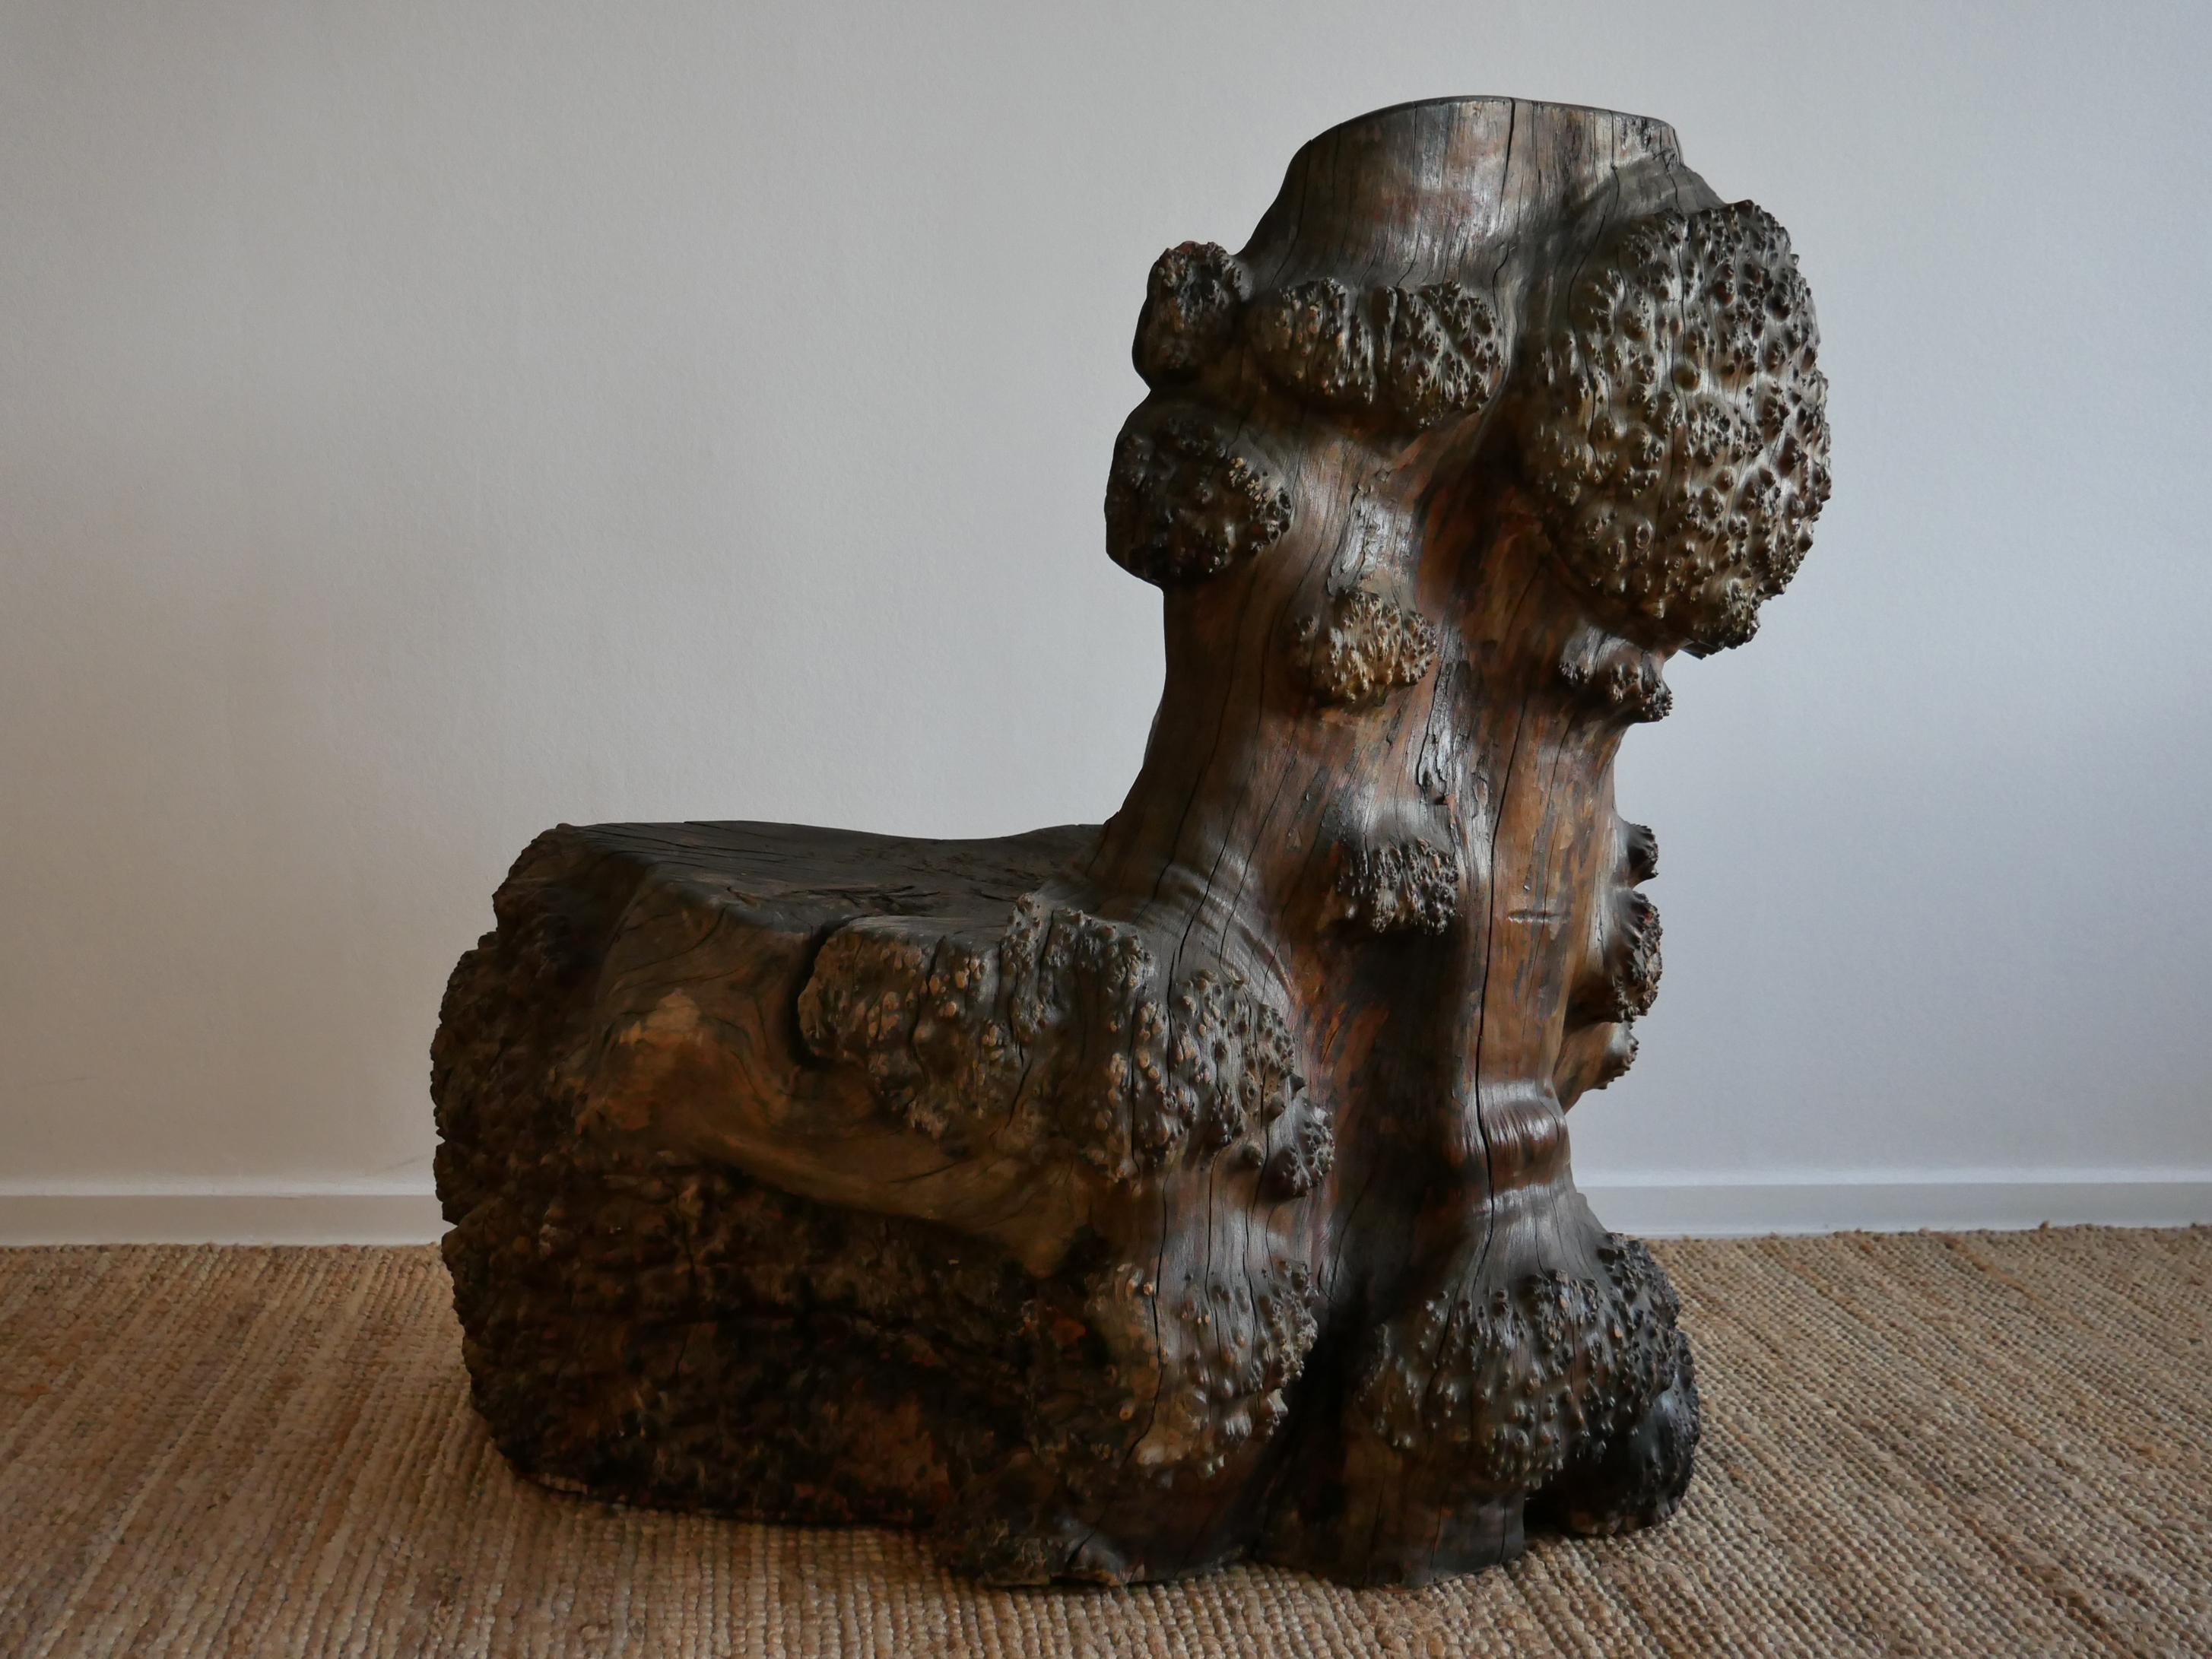 Extremly big stump chair, one of a kind!
The weight and size of this norwegian kubbestol is something out of the ordinary. Its presence, sculptrual qualities, the way the organic nots and twists plays beautiful with the light. The front is black